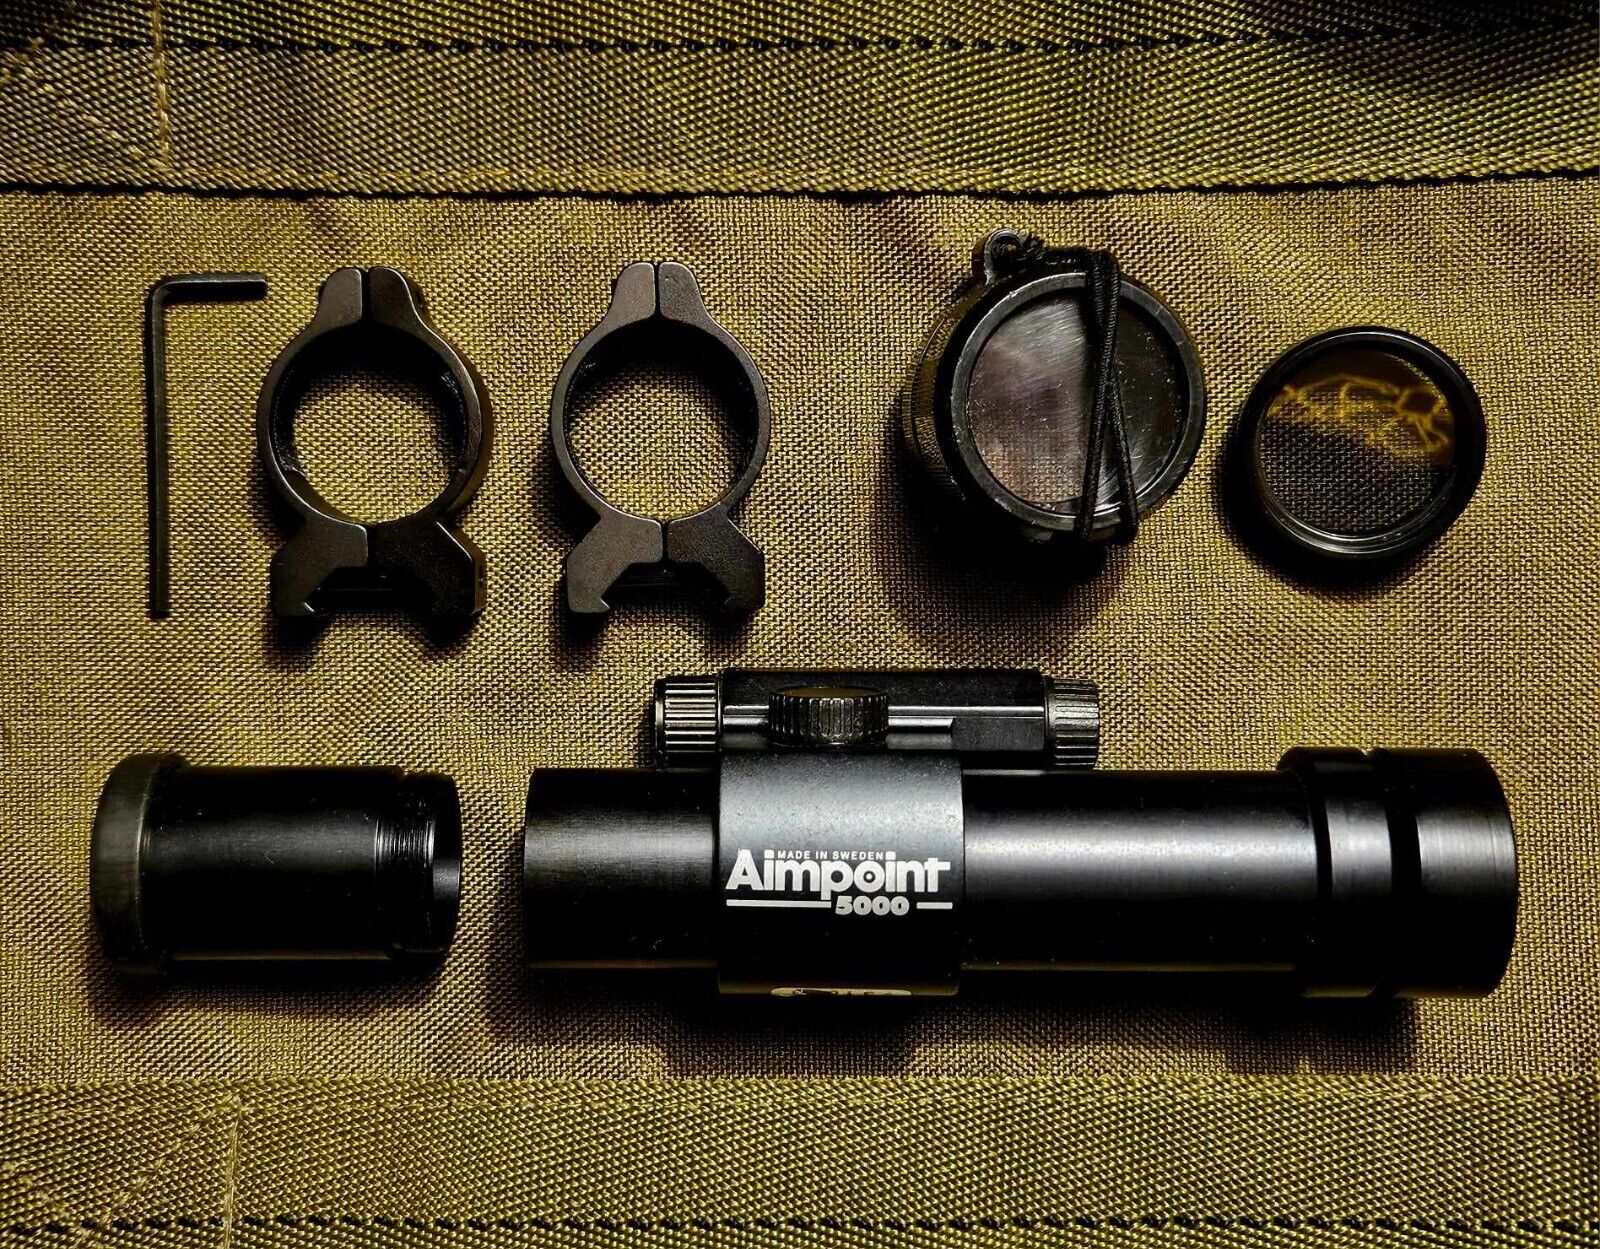 Original Aimpoint 5000 Red Dot Sight, Black Hawk Down, Operation Gothic Serpent